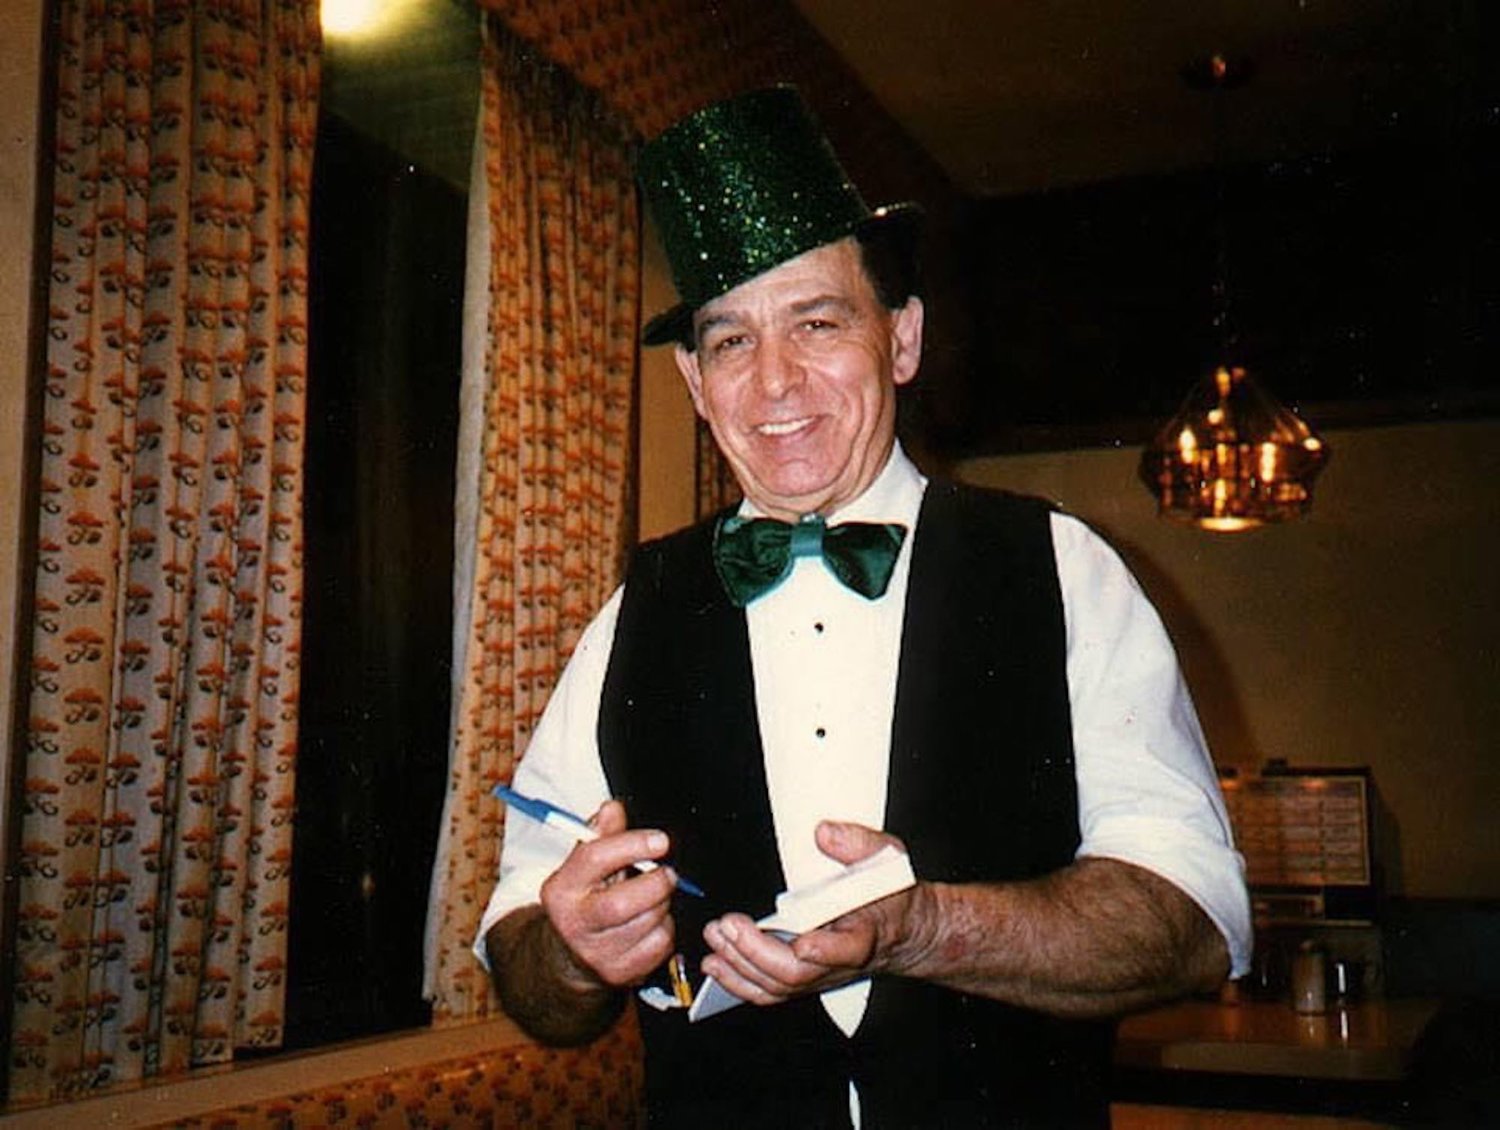 Morfessis dressed up for St. Patrick’s Day in the 1990s.